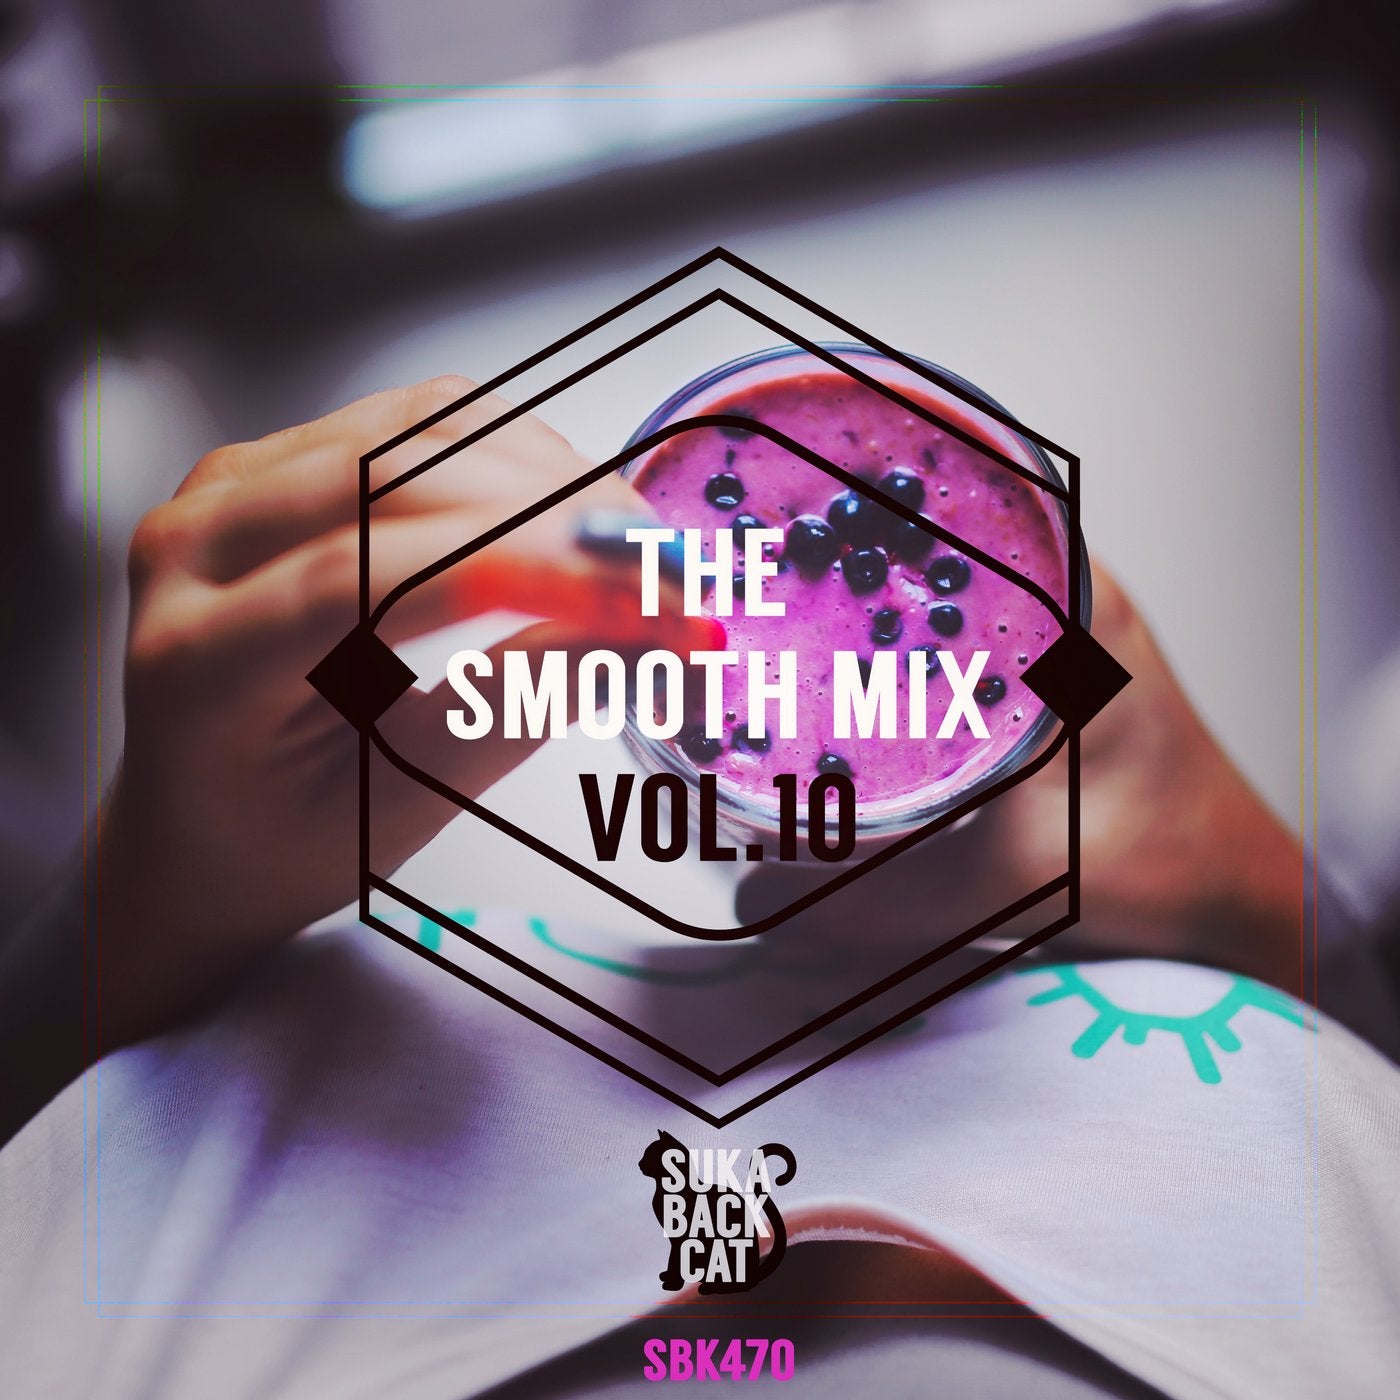 The Smooth Mix, Vol. 10